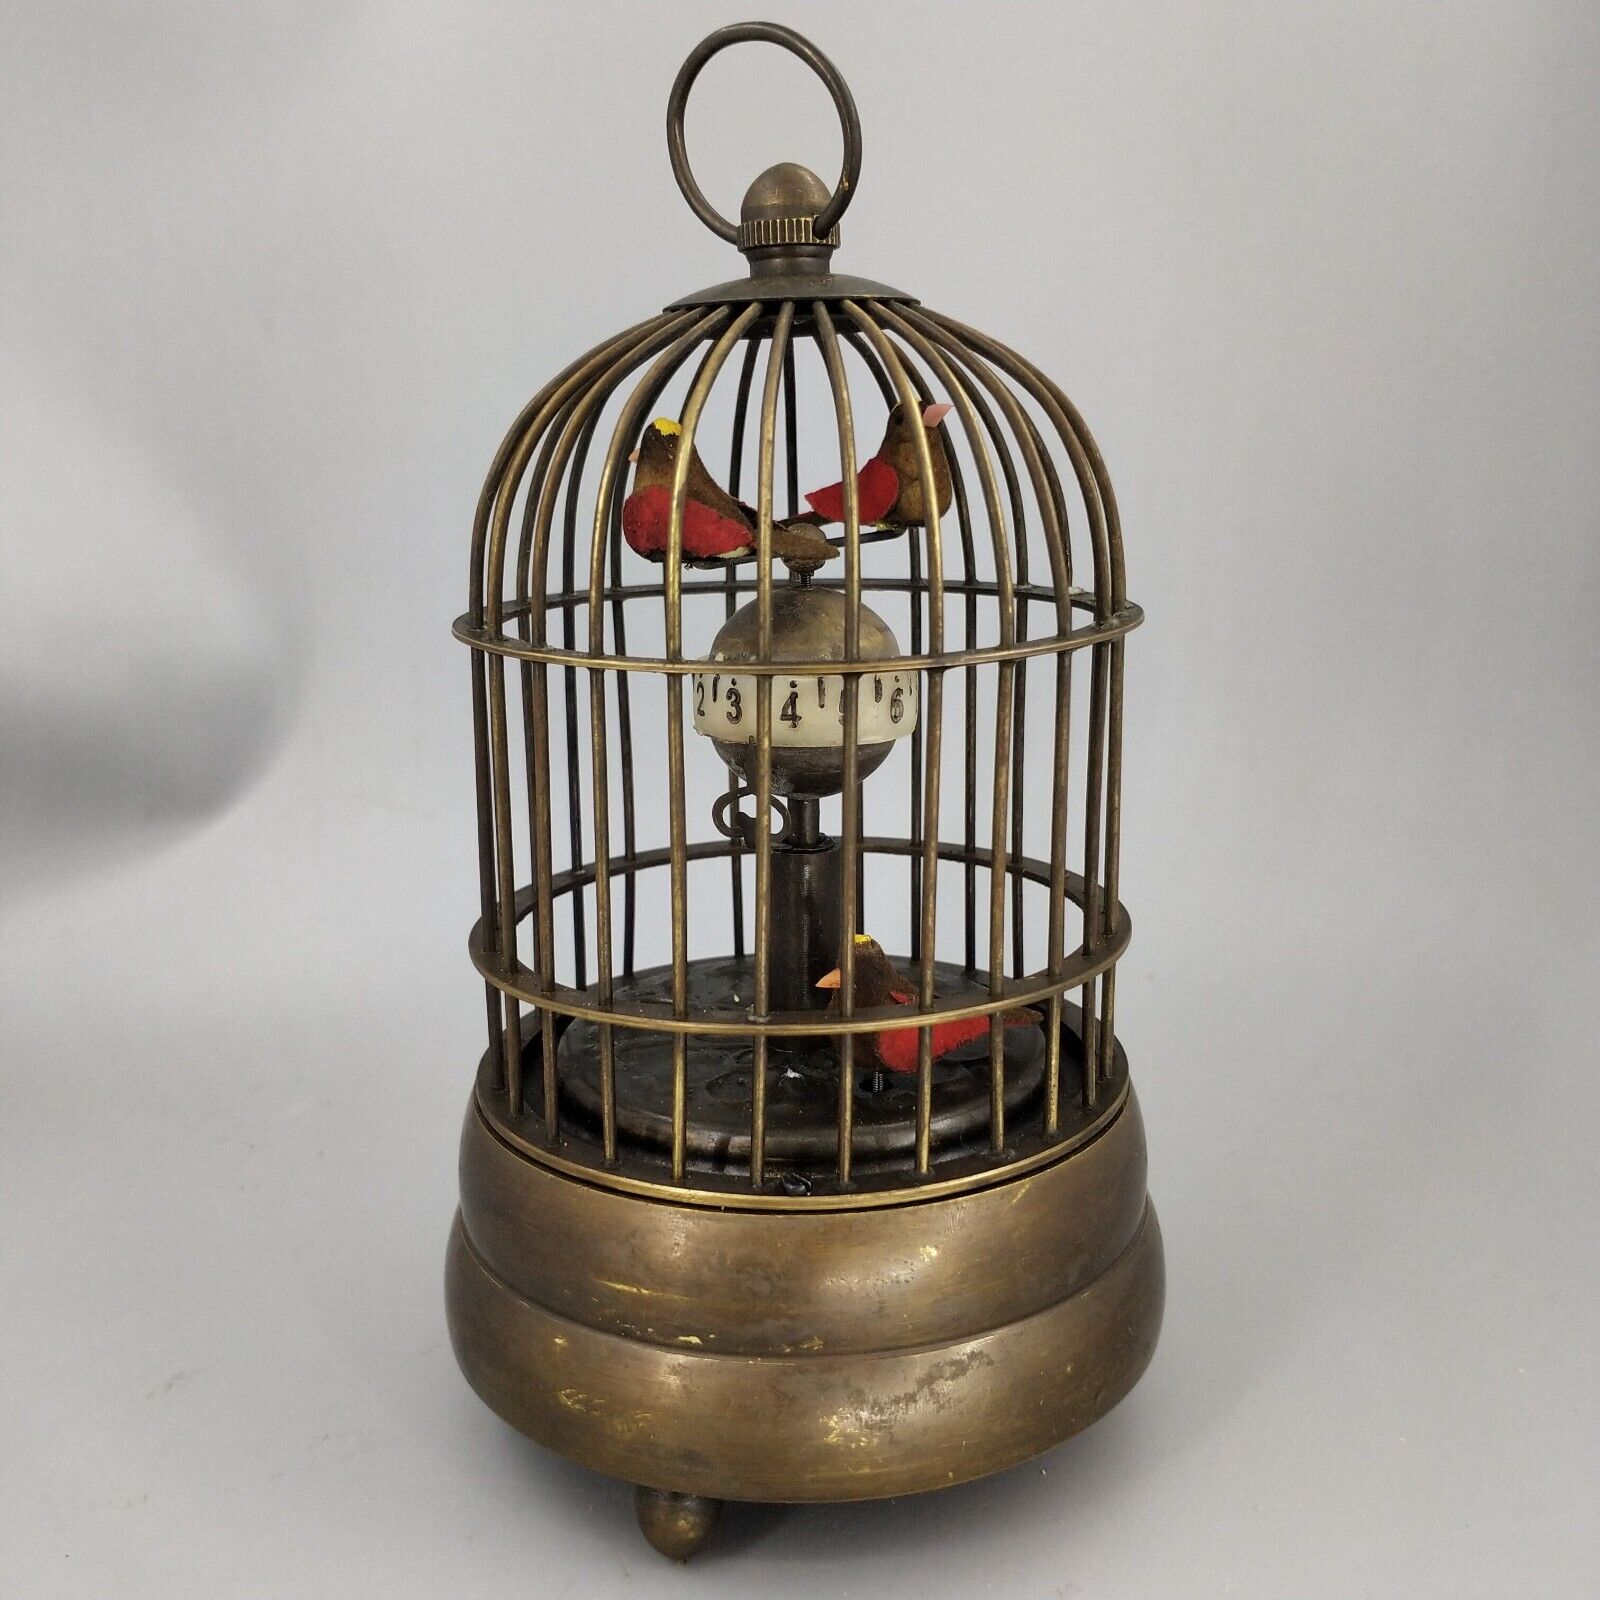 Brass Mechanical Table Clock Bird Cage Hanging Collectible Old Handwork Gift Toy